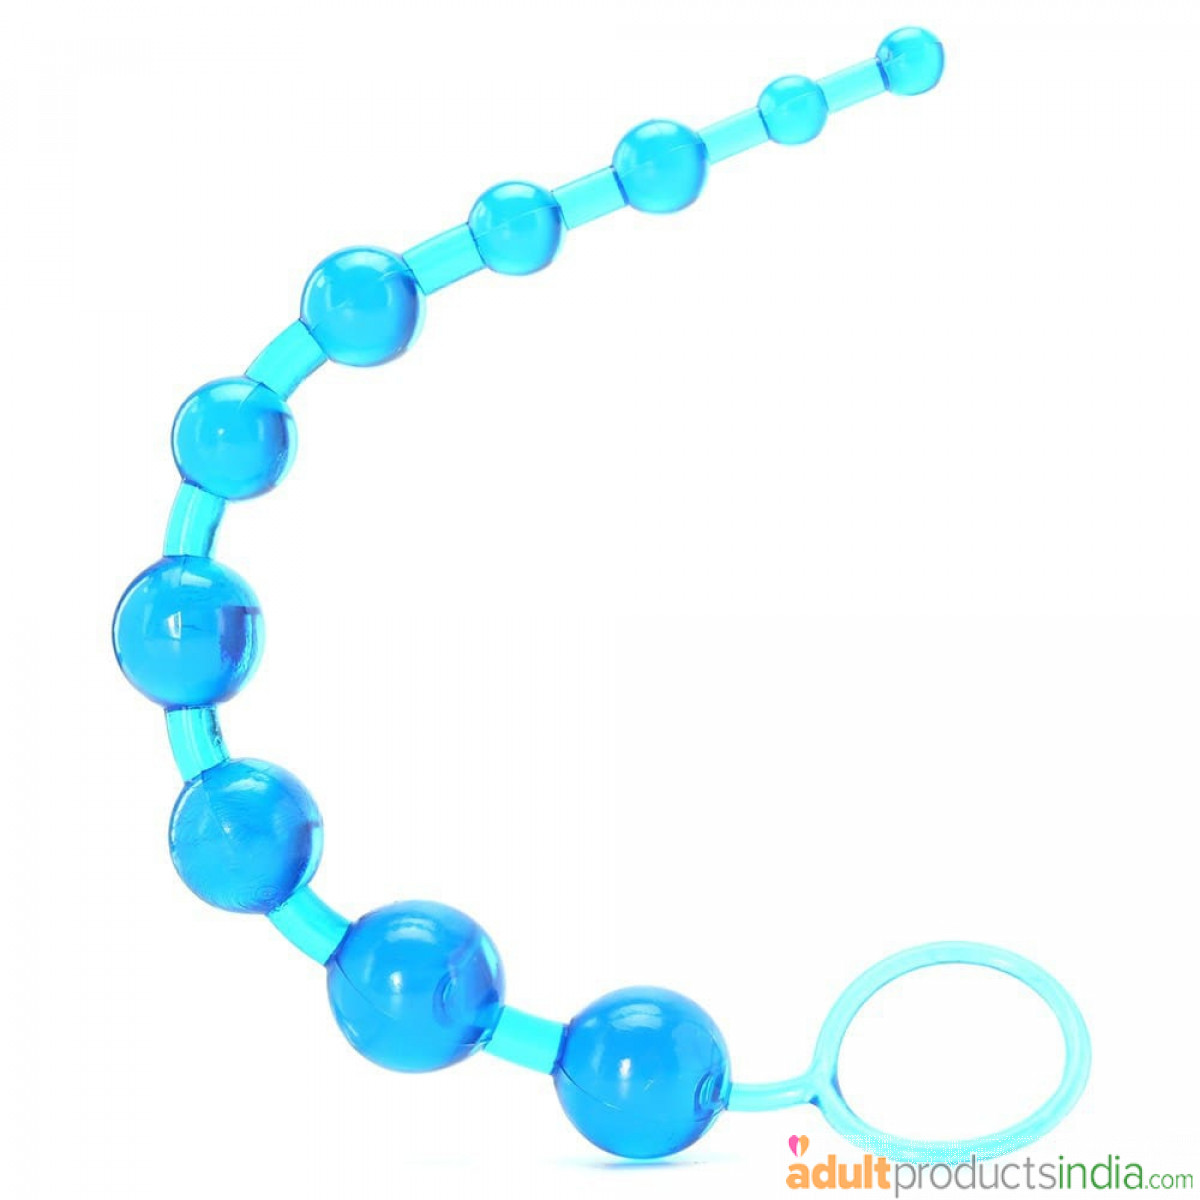 Anal Beads Blue Adult Products India